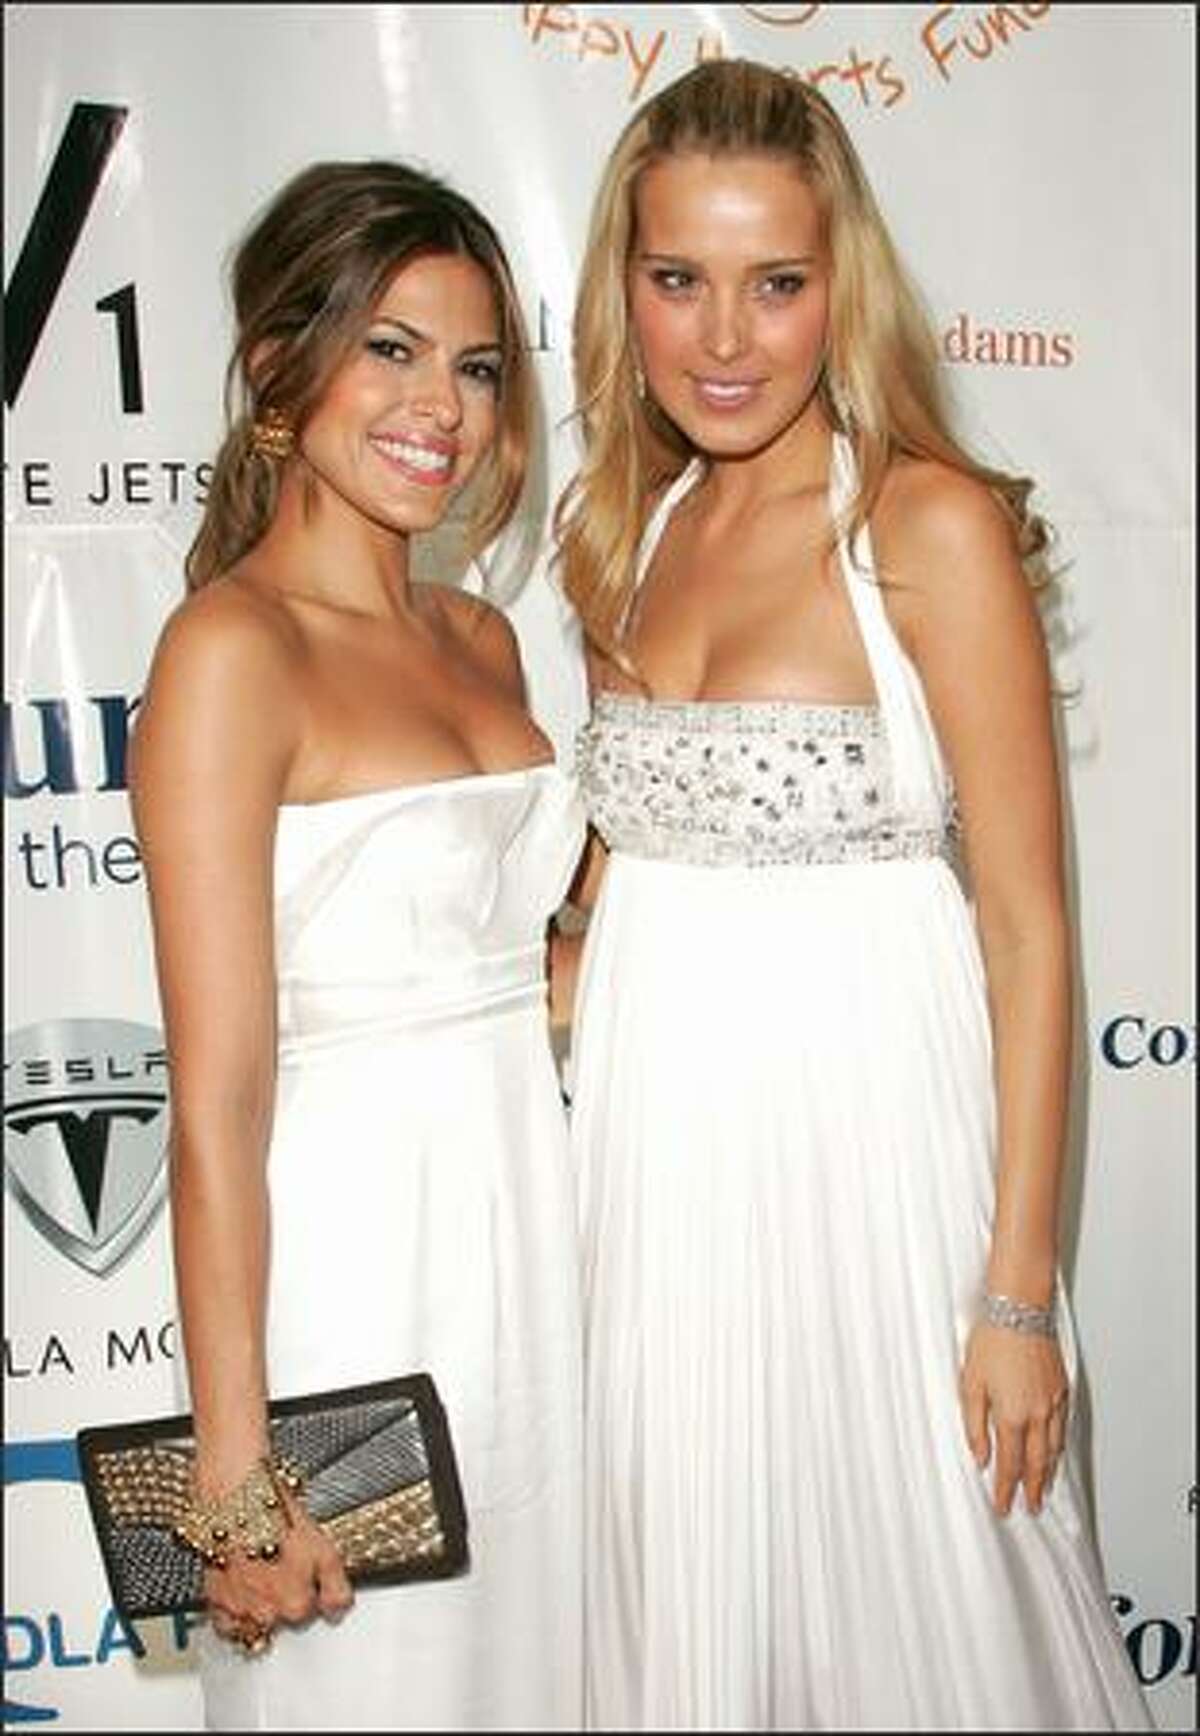 Actress Eva Mendes and model Petra Nemcova attend the "Heart Of Gold Ball" to benefit The Happy Hearts Fund at Cipriani's Wall street location on October 10, 2007 in New York City.